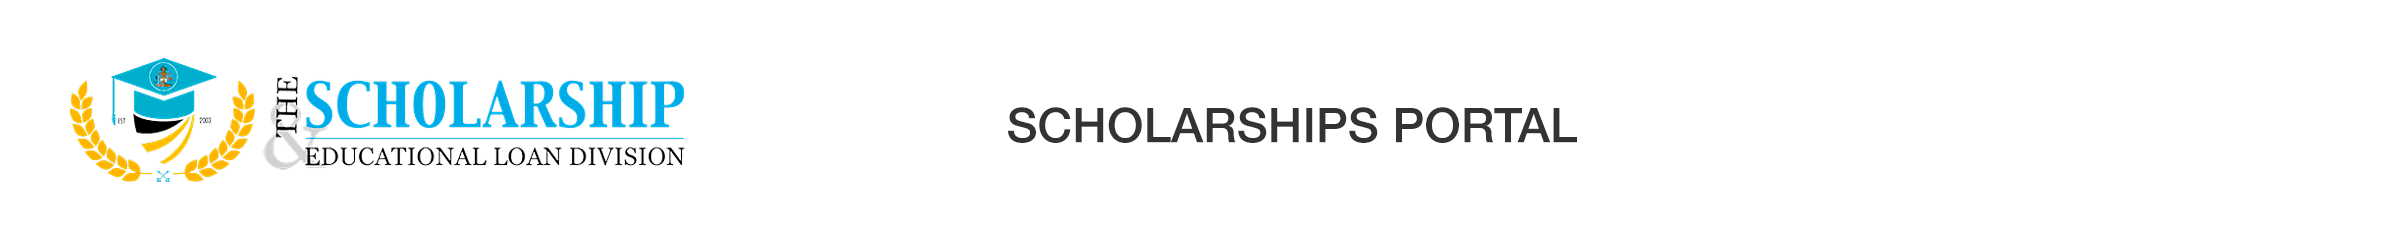 The Ministry of Education Scholarship & Educational Loan Division Scholarships logo